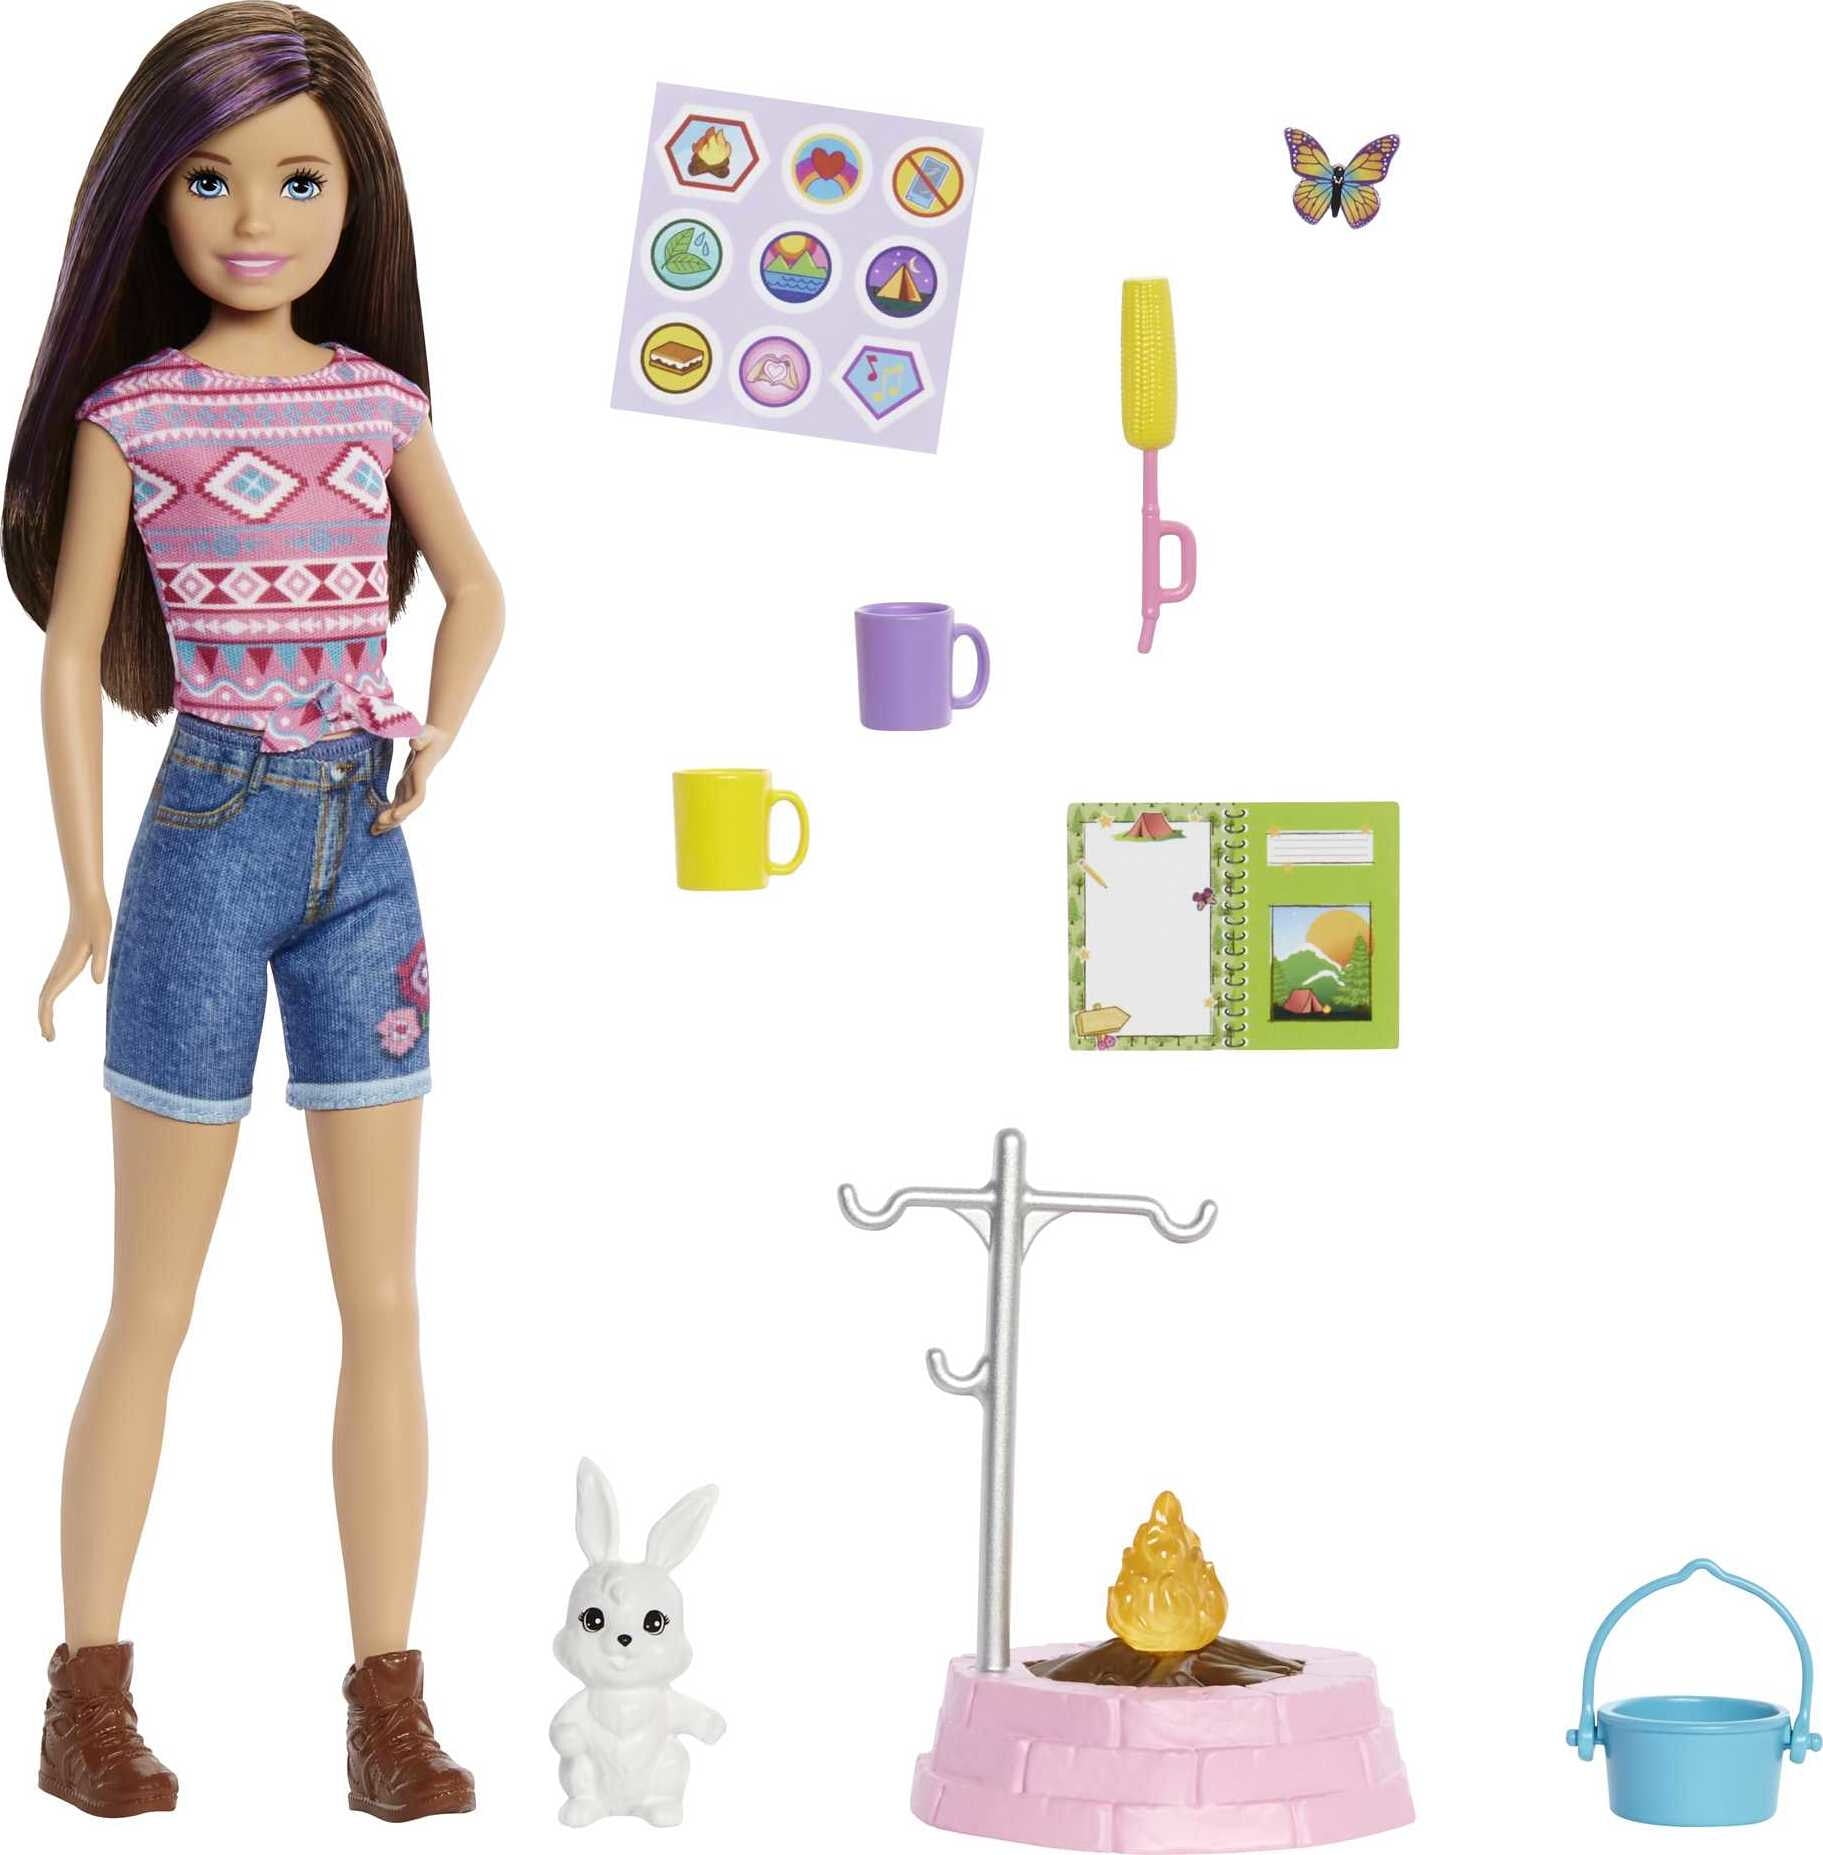 Barbie It Takes Two Skipper Camping Doll with Pet Bunny & Accessories, 3 to 7 Year Olds